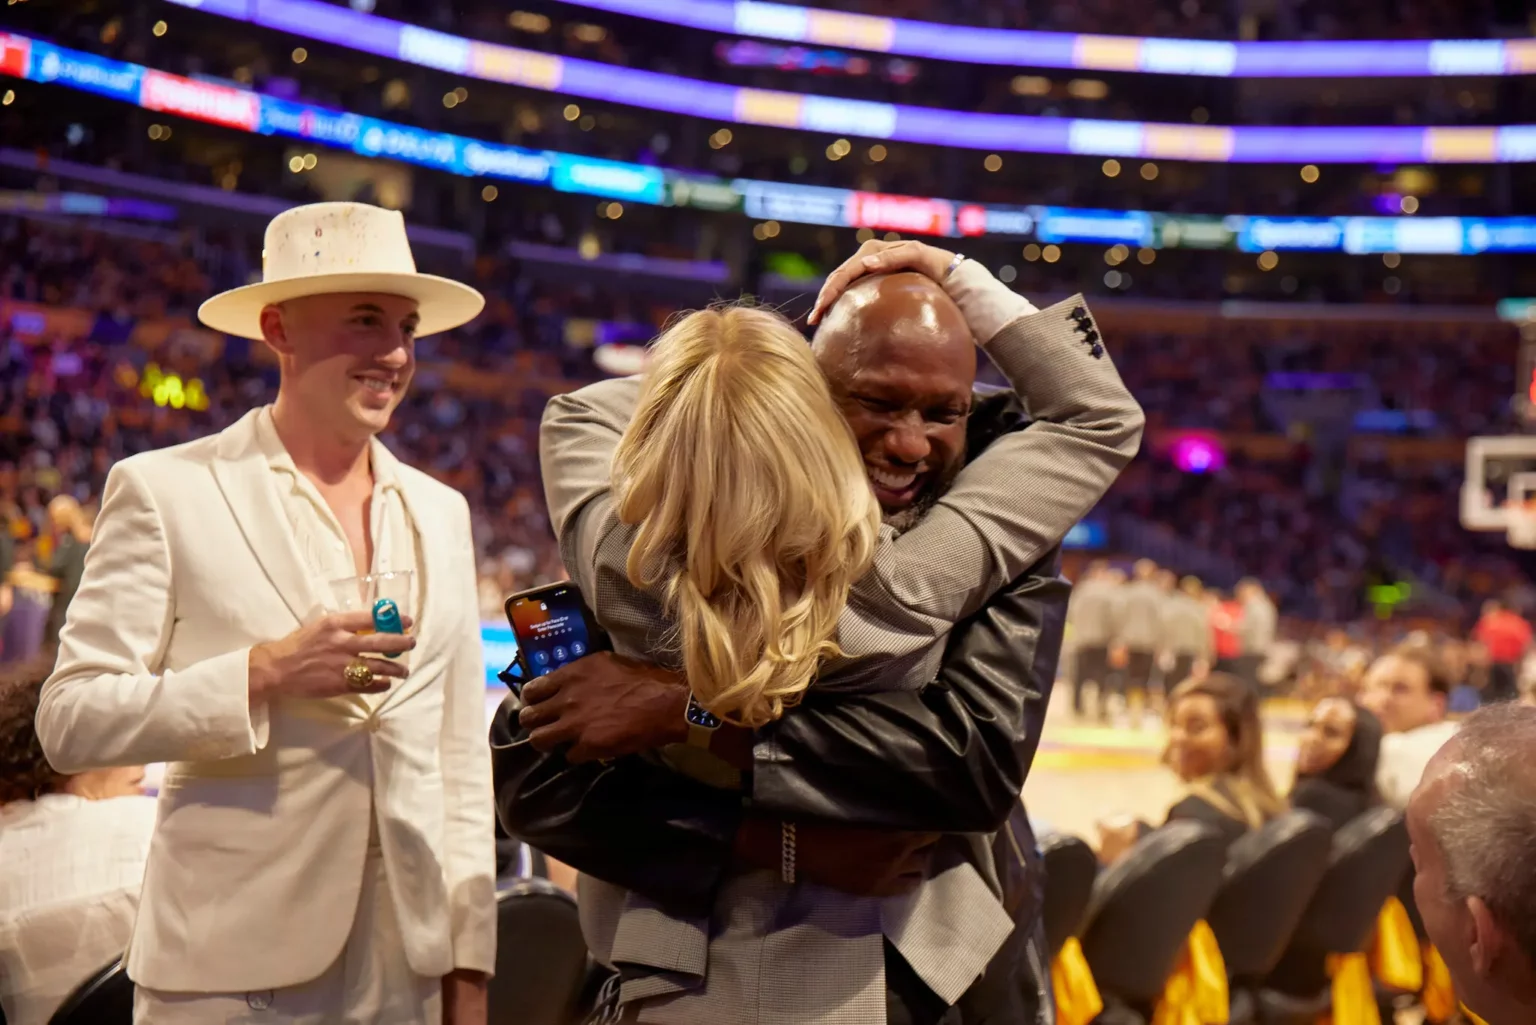 Ms. Buss’s nephew Riley Buss-Drexel looked on as she hugged the former Lakers power forward Lamar Odom at an October home game.Credit…Magdalena Wosinka